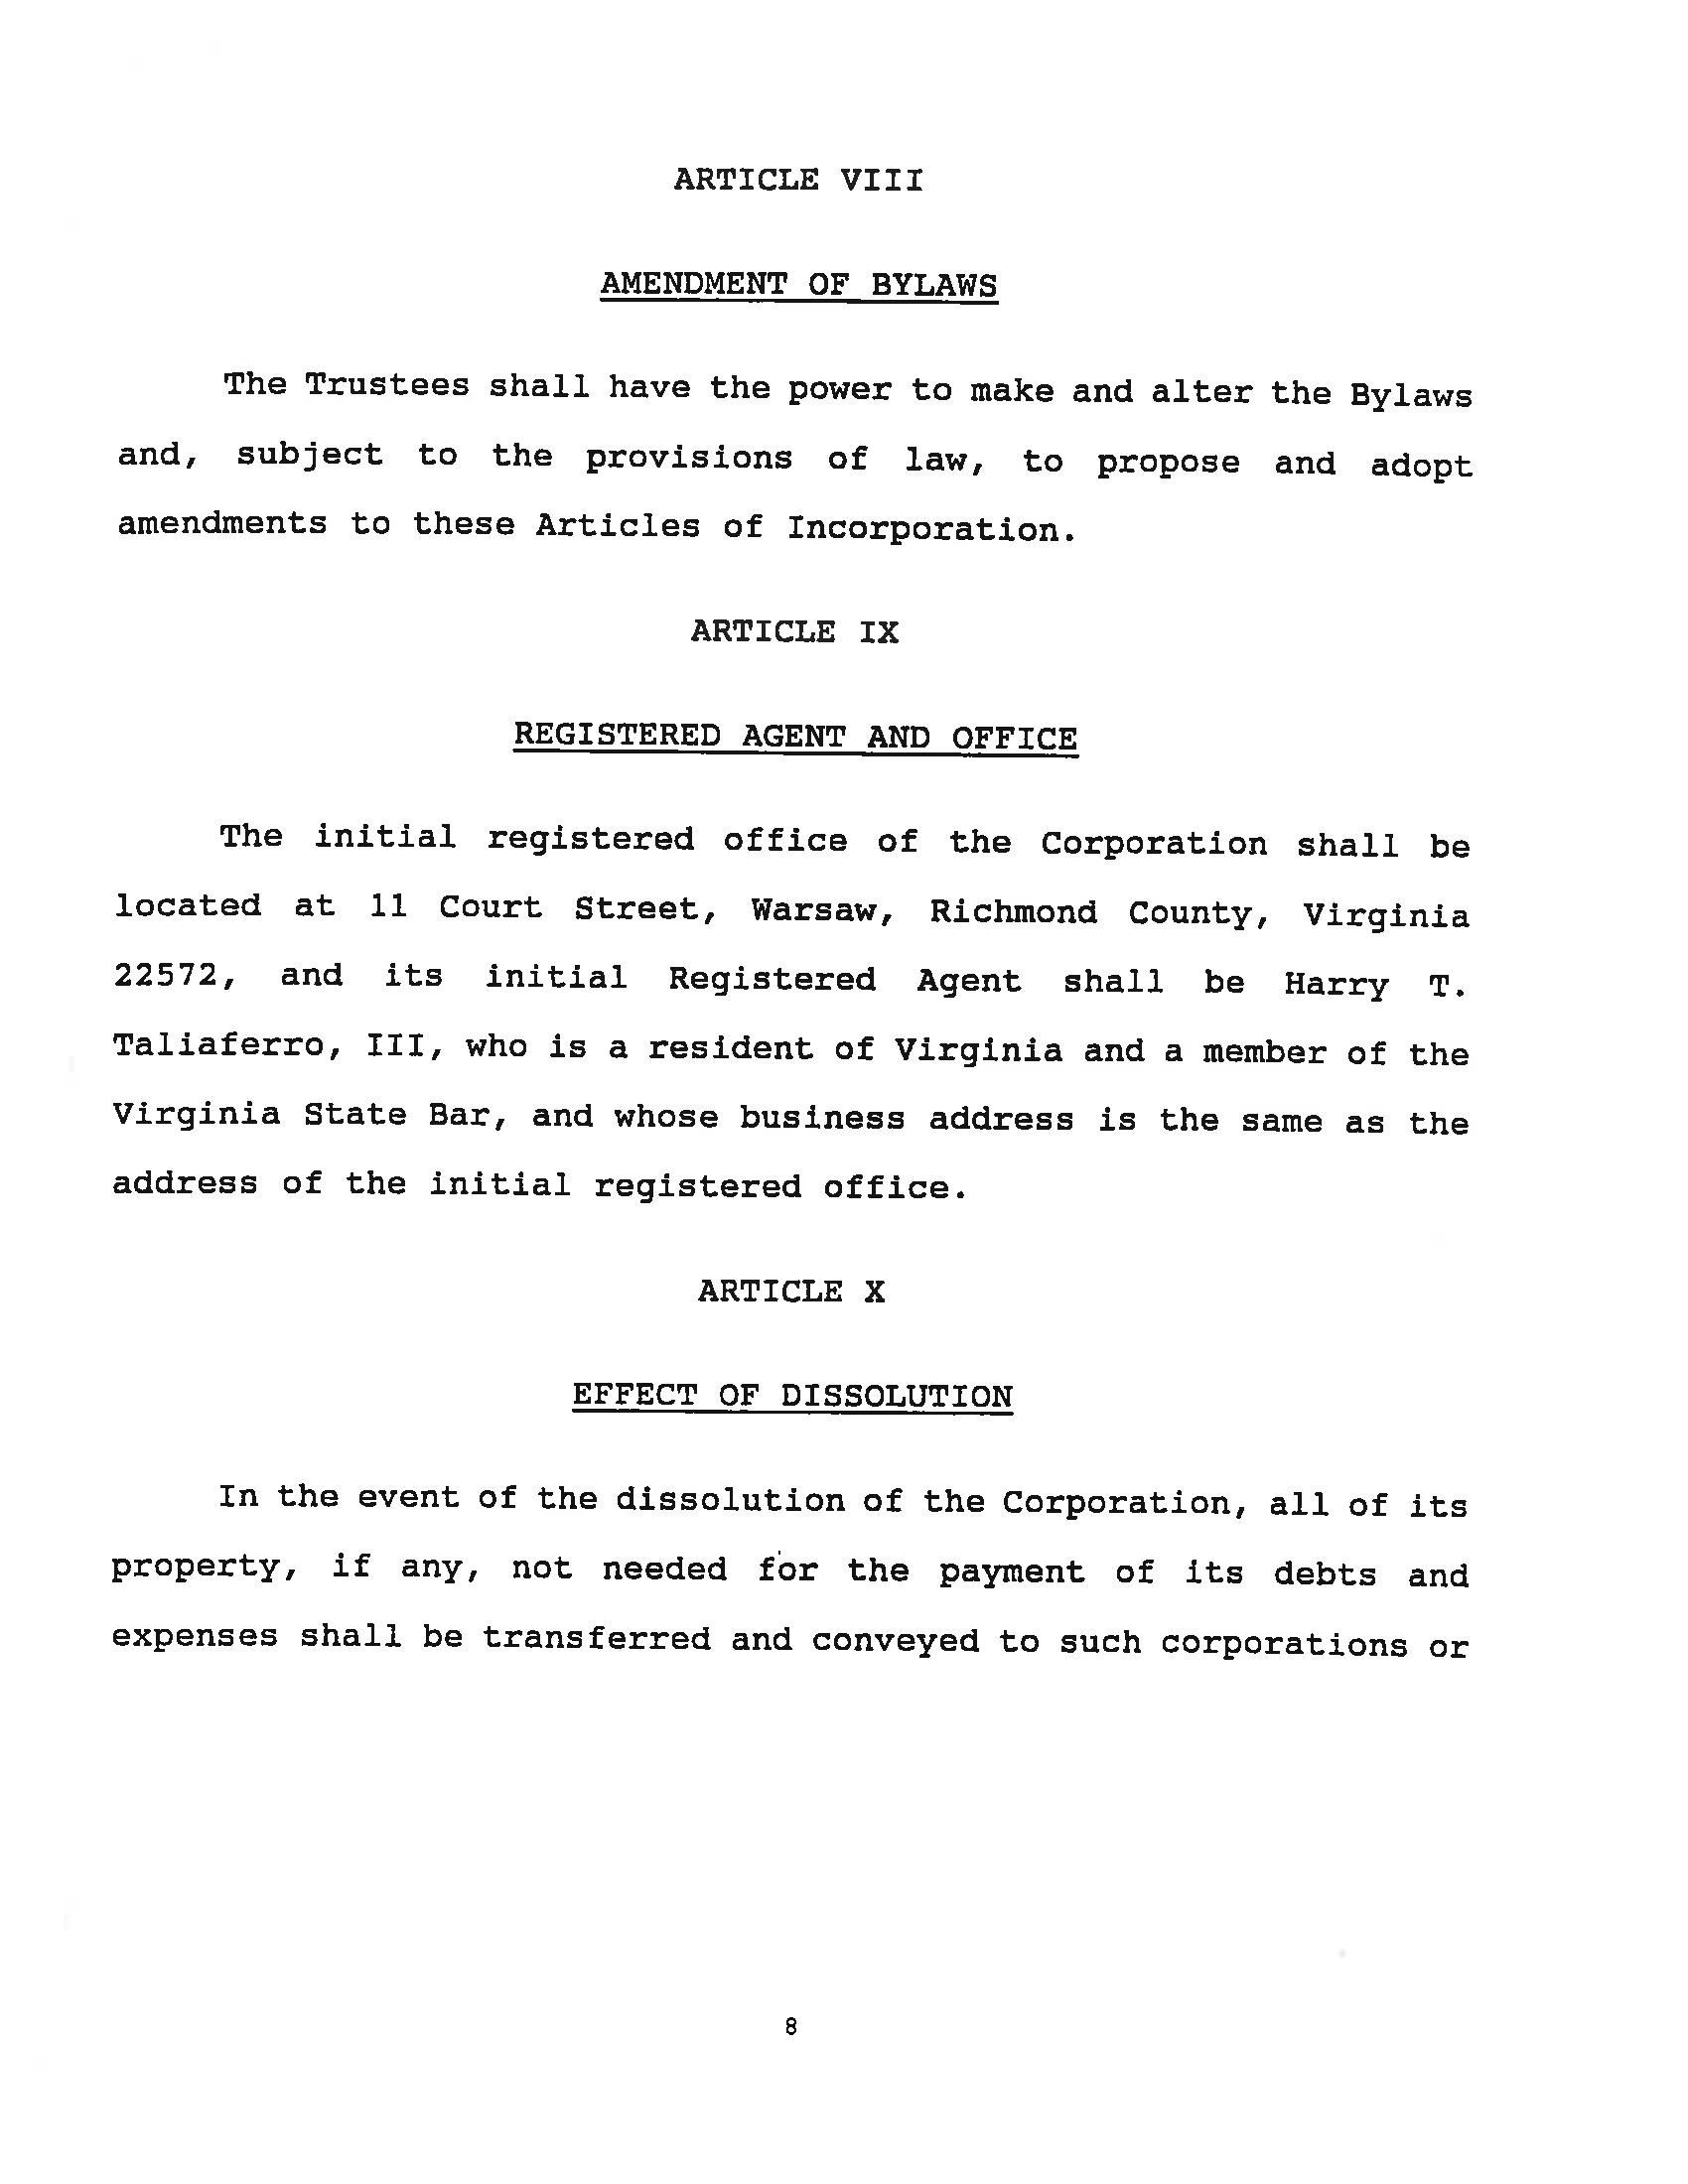 Menokin Foundation Articles of Incorporation_Page_10.png